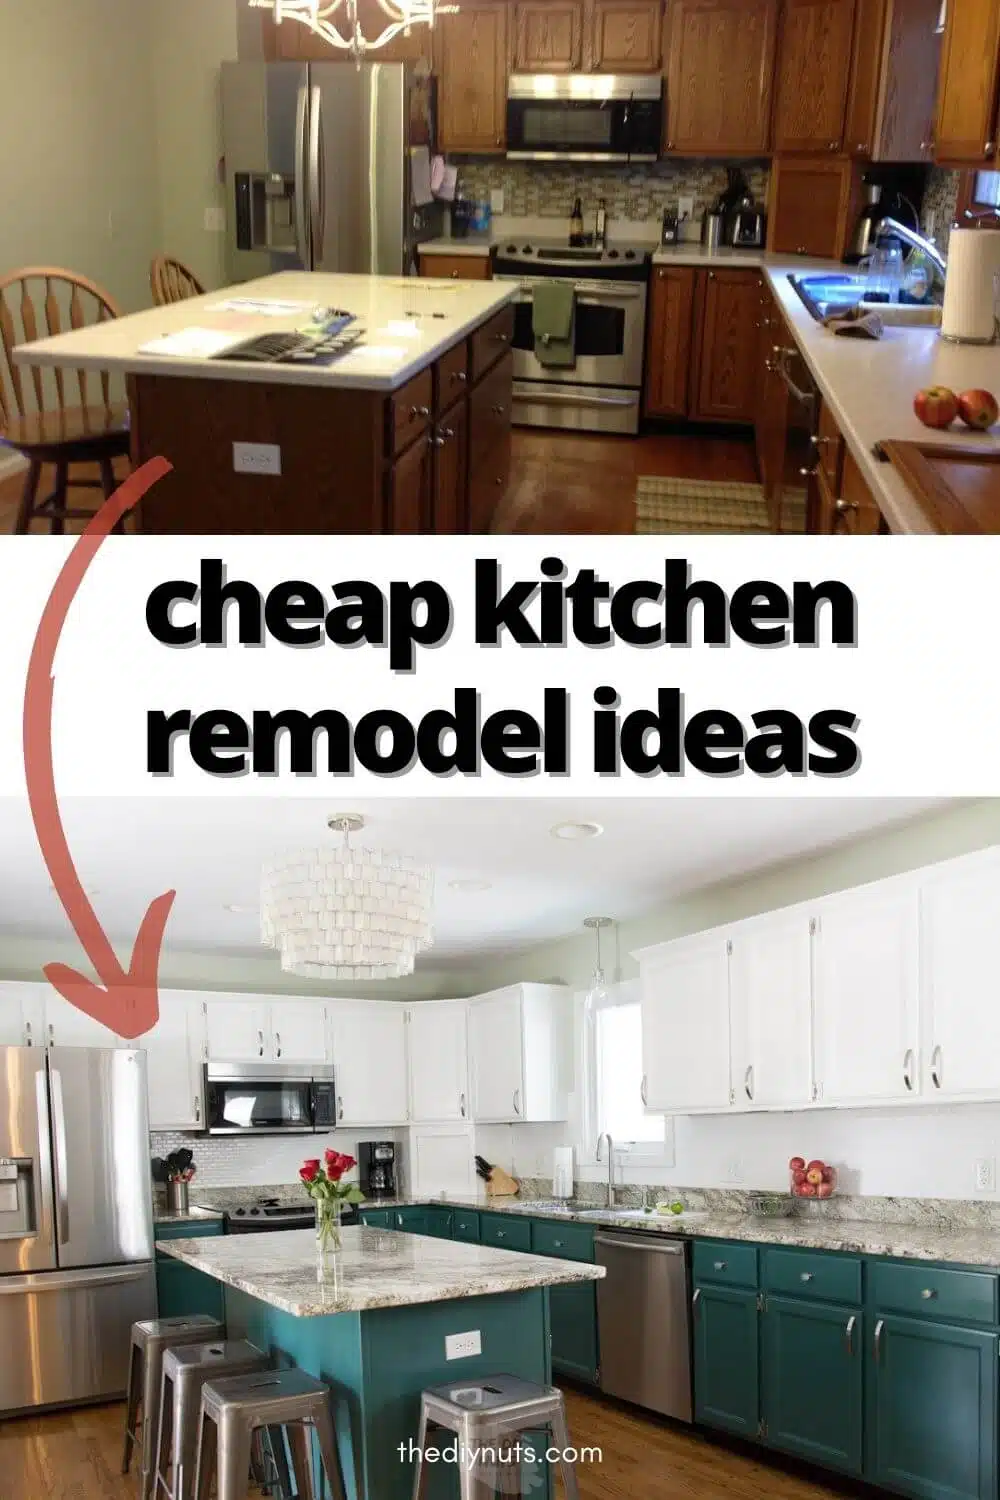 cheap kitchen remodel ideas with oak dated kitchen before picture and after picture with two-toned painted cabinets